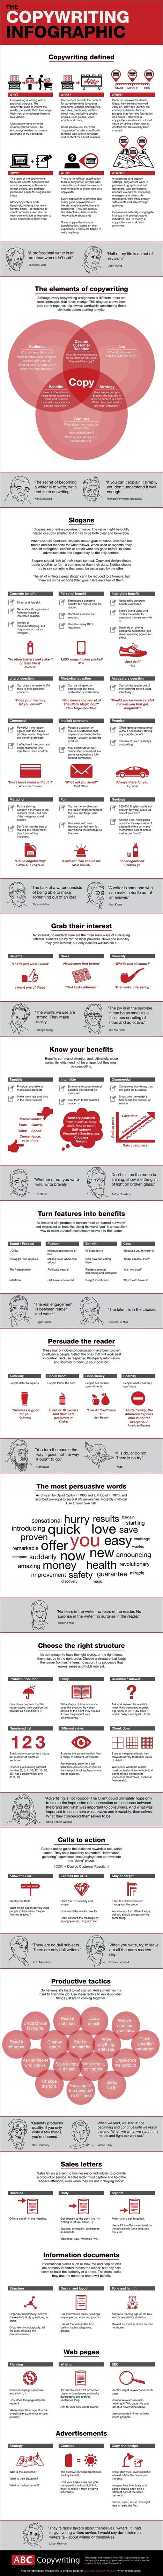 The copywriting infographic | Time to Learn | Scoop.it